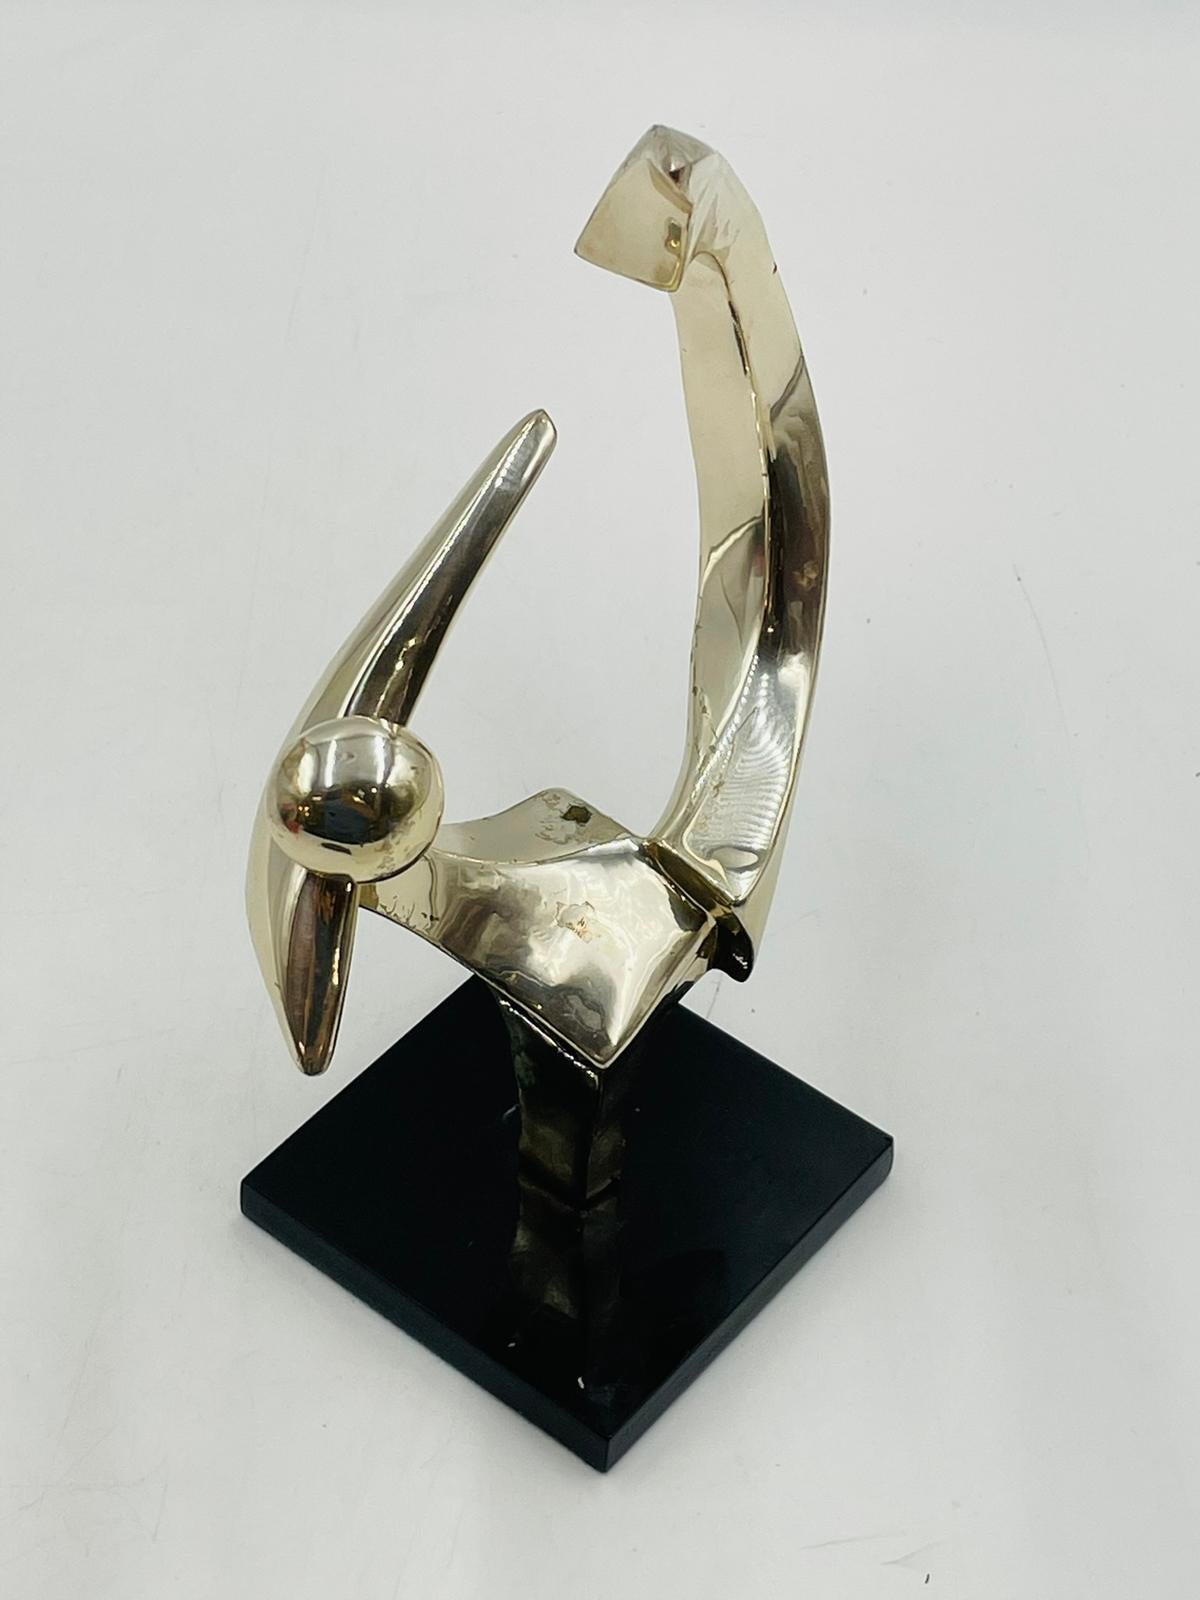 Late 20th Century Nickel Plated Bronze Sculpture by Kieff Grediaga #4/10 Signed For Sale